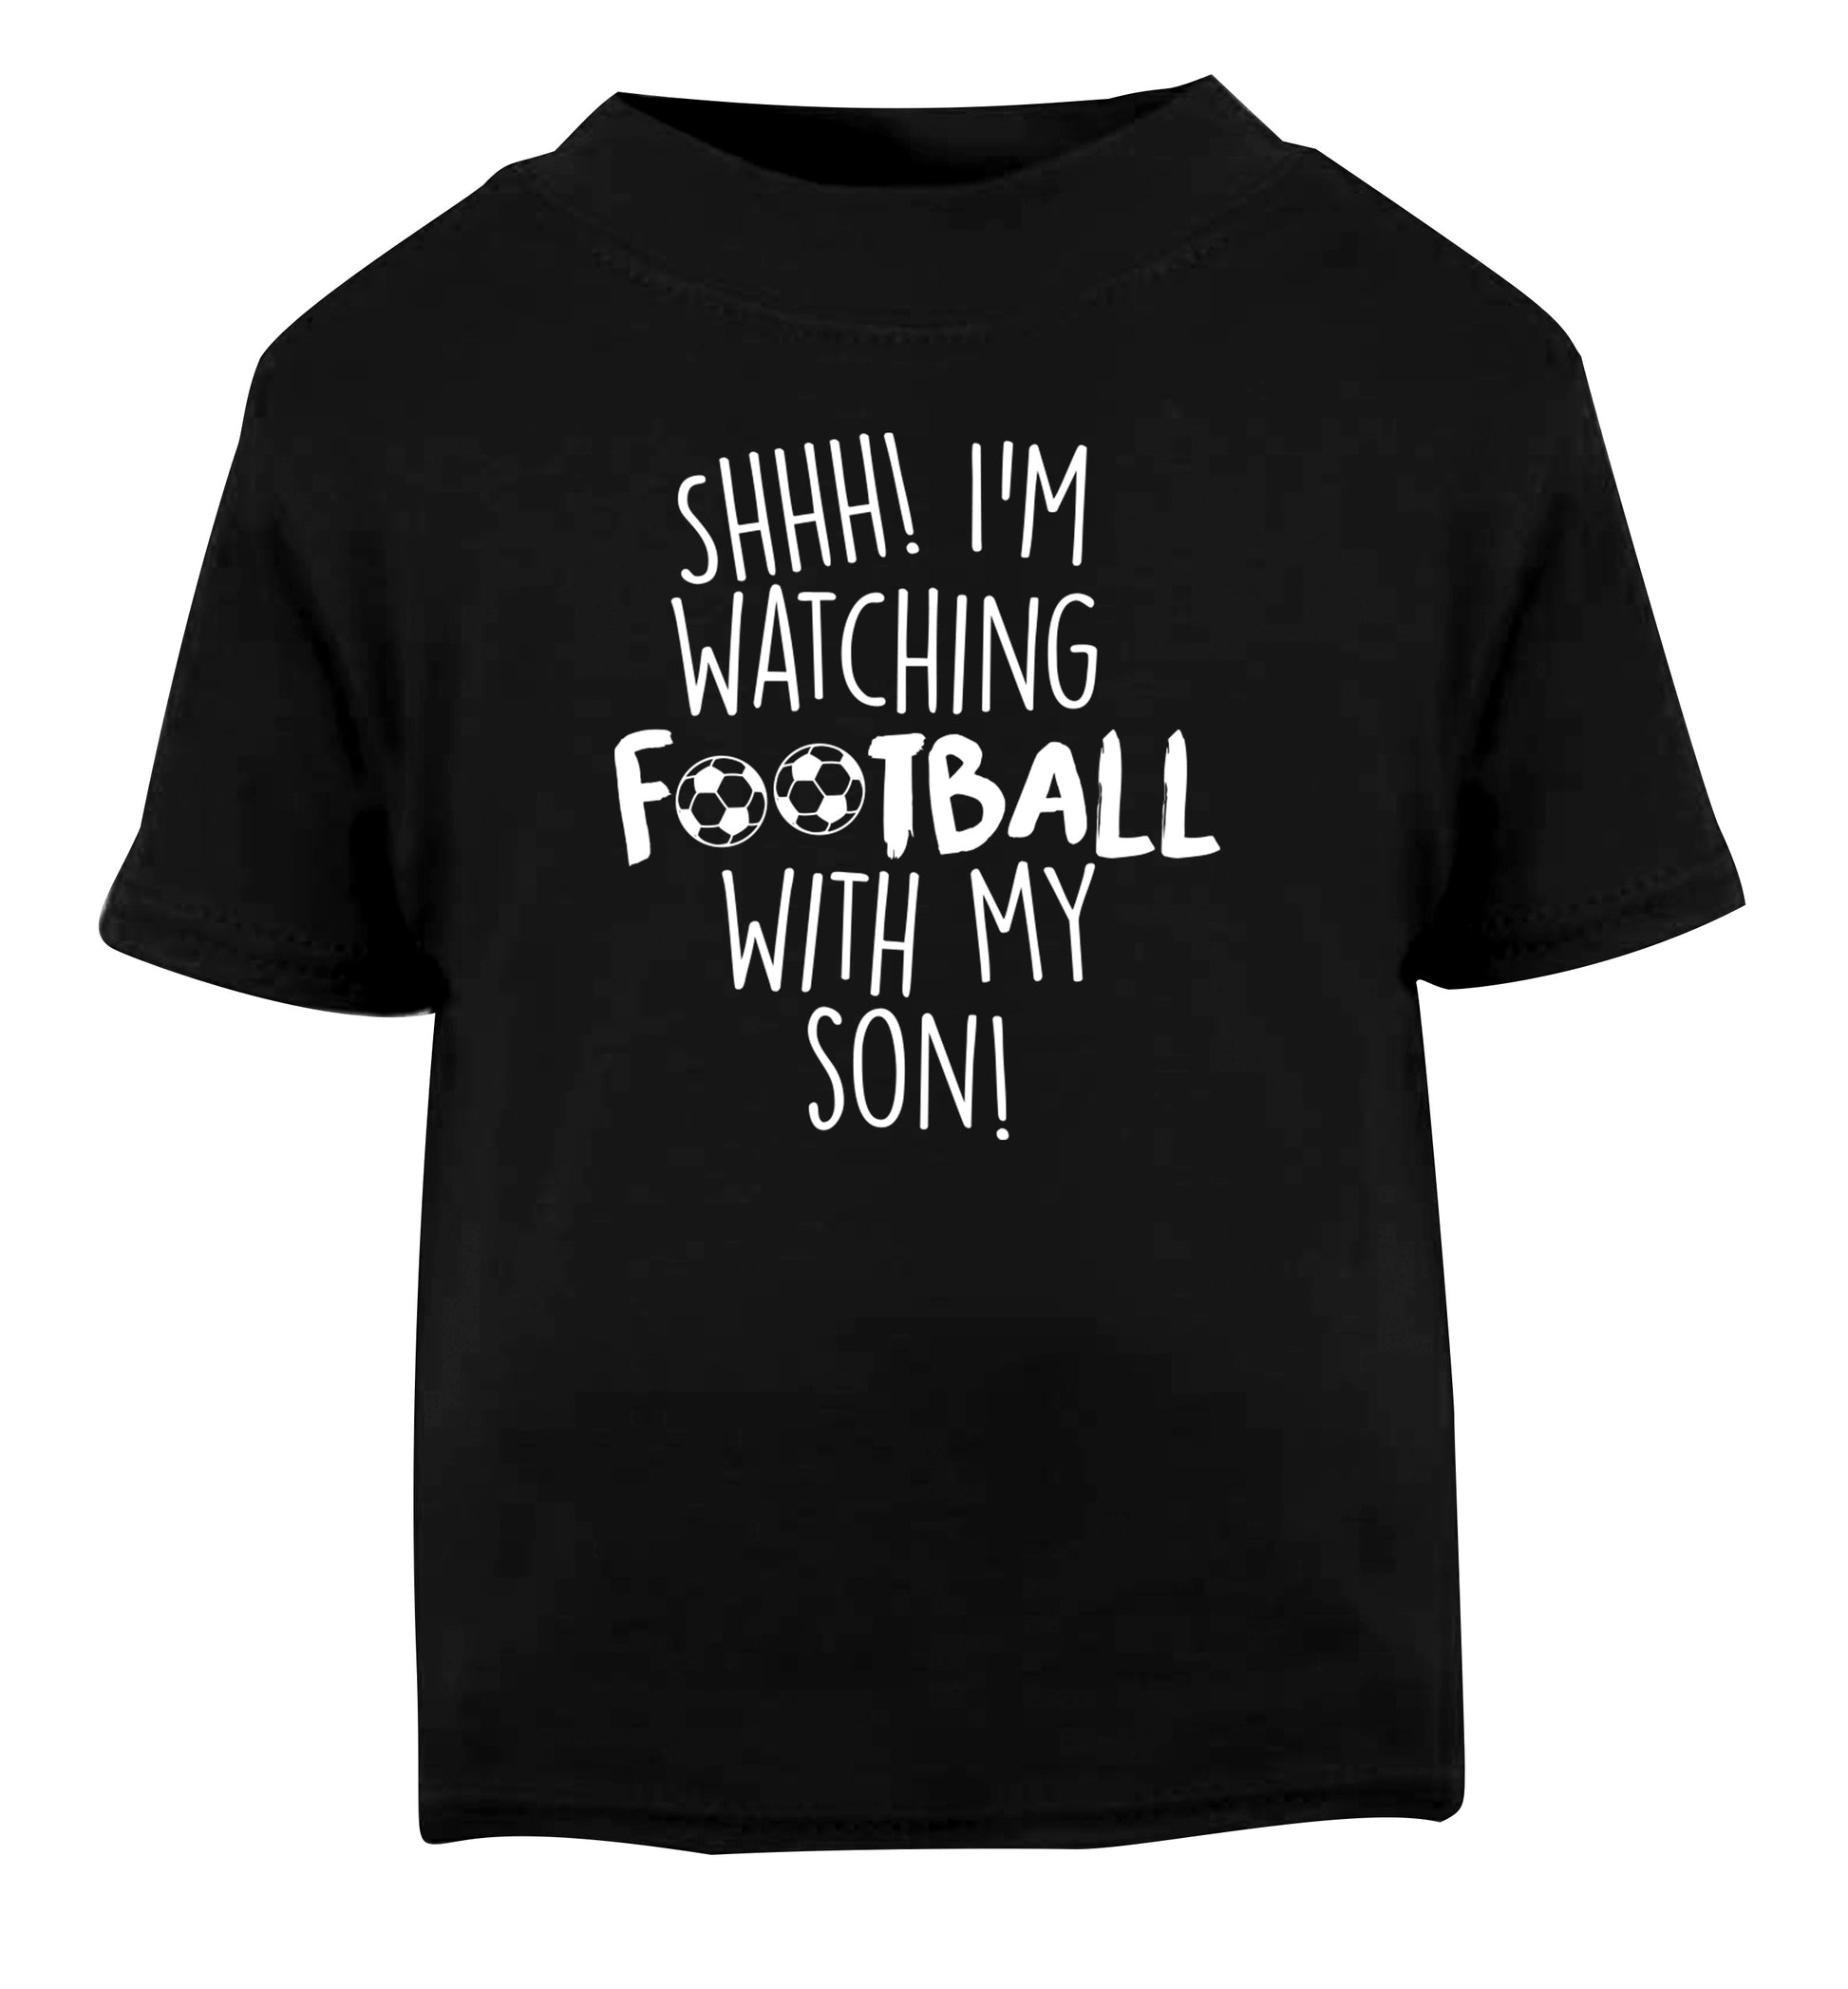 Shhh I'm watching football with my son Black Baby Toddler Tshirt 2 years